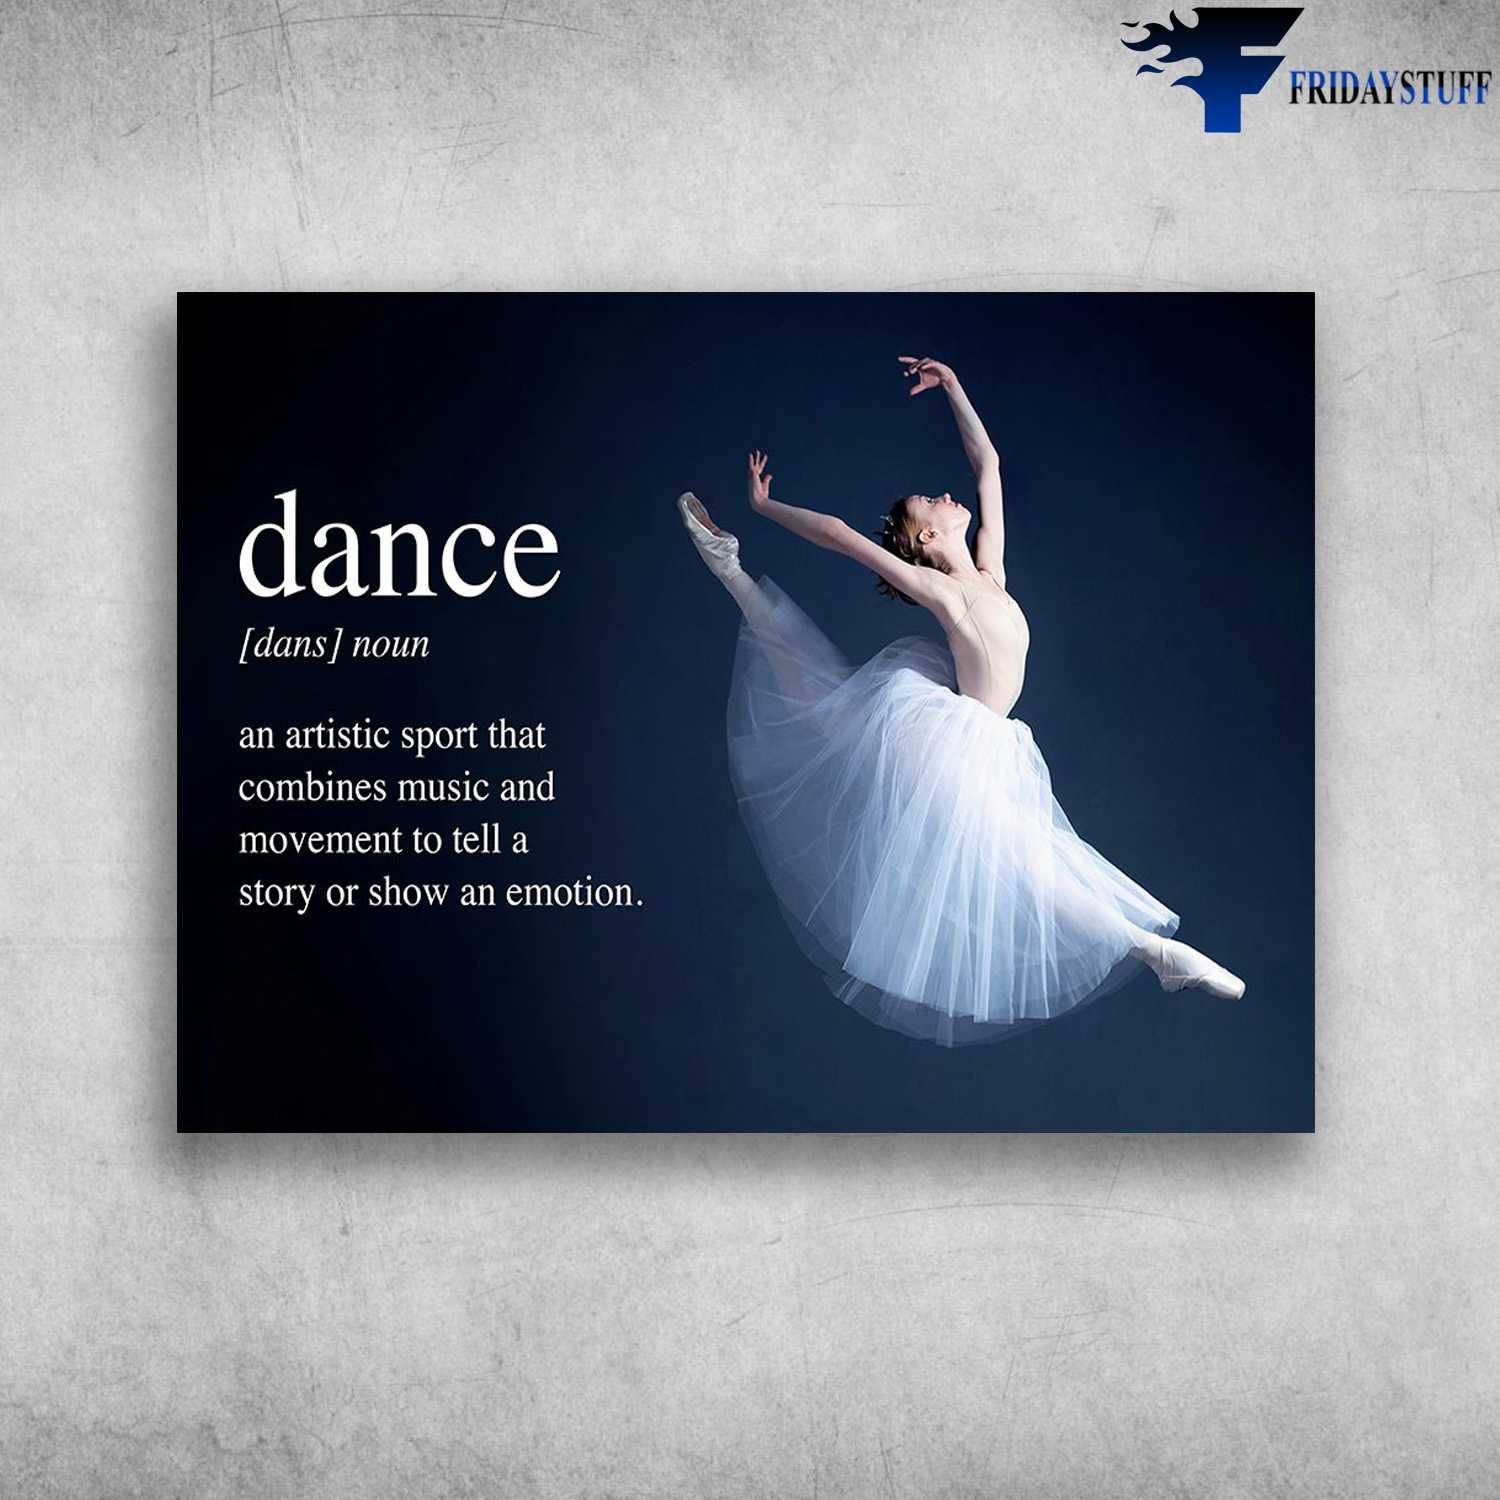 Ballet Dancer - Dance Noun, An Artistic Sport That, Combines Music And Movement To Tell A Story, Or Show An Emotion